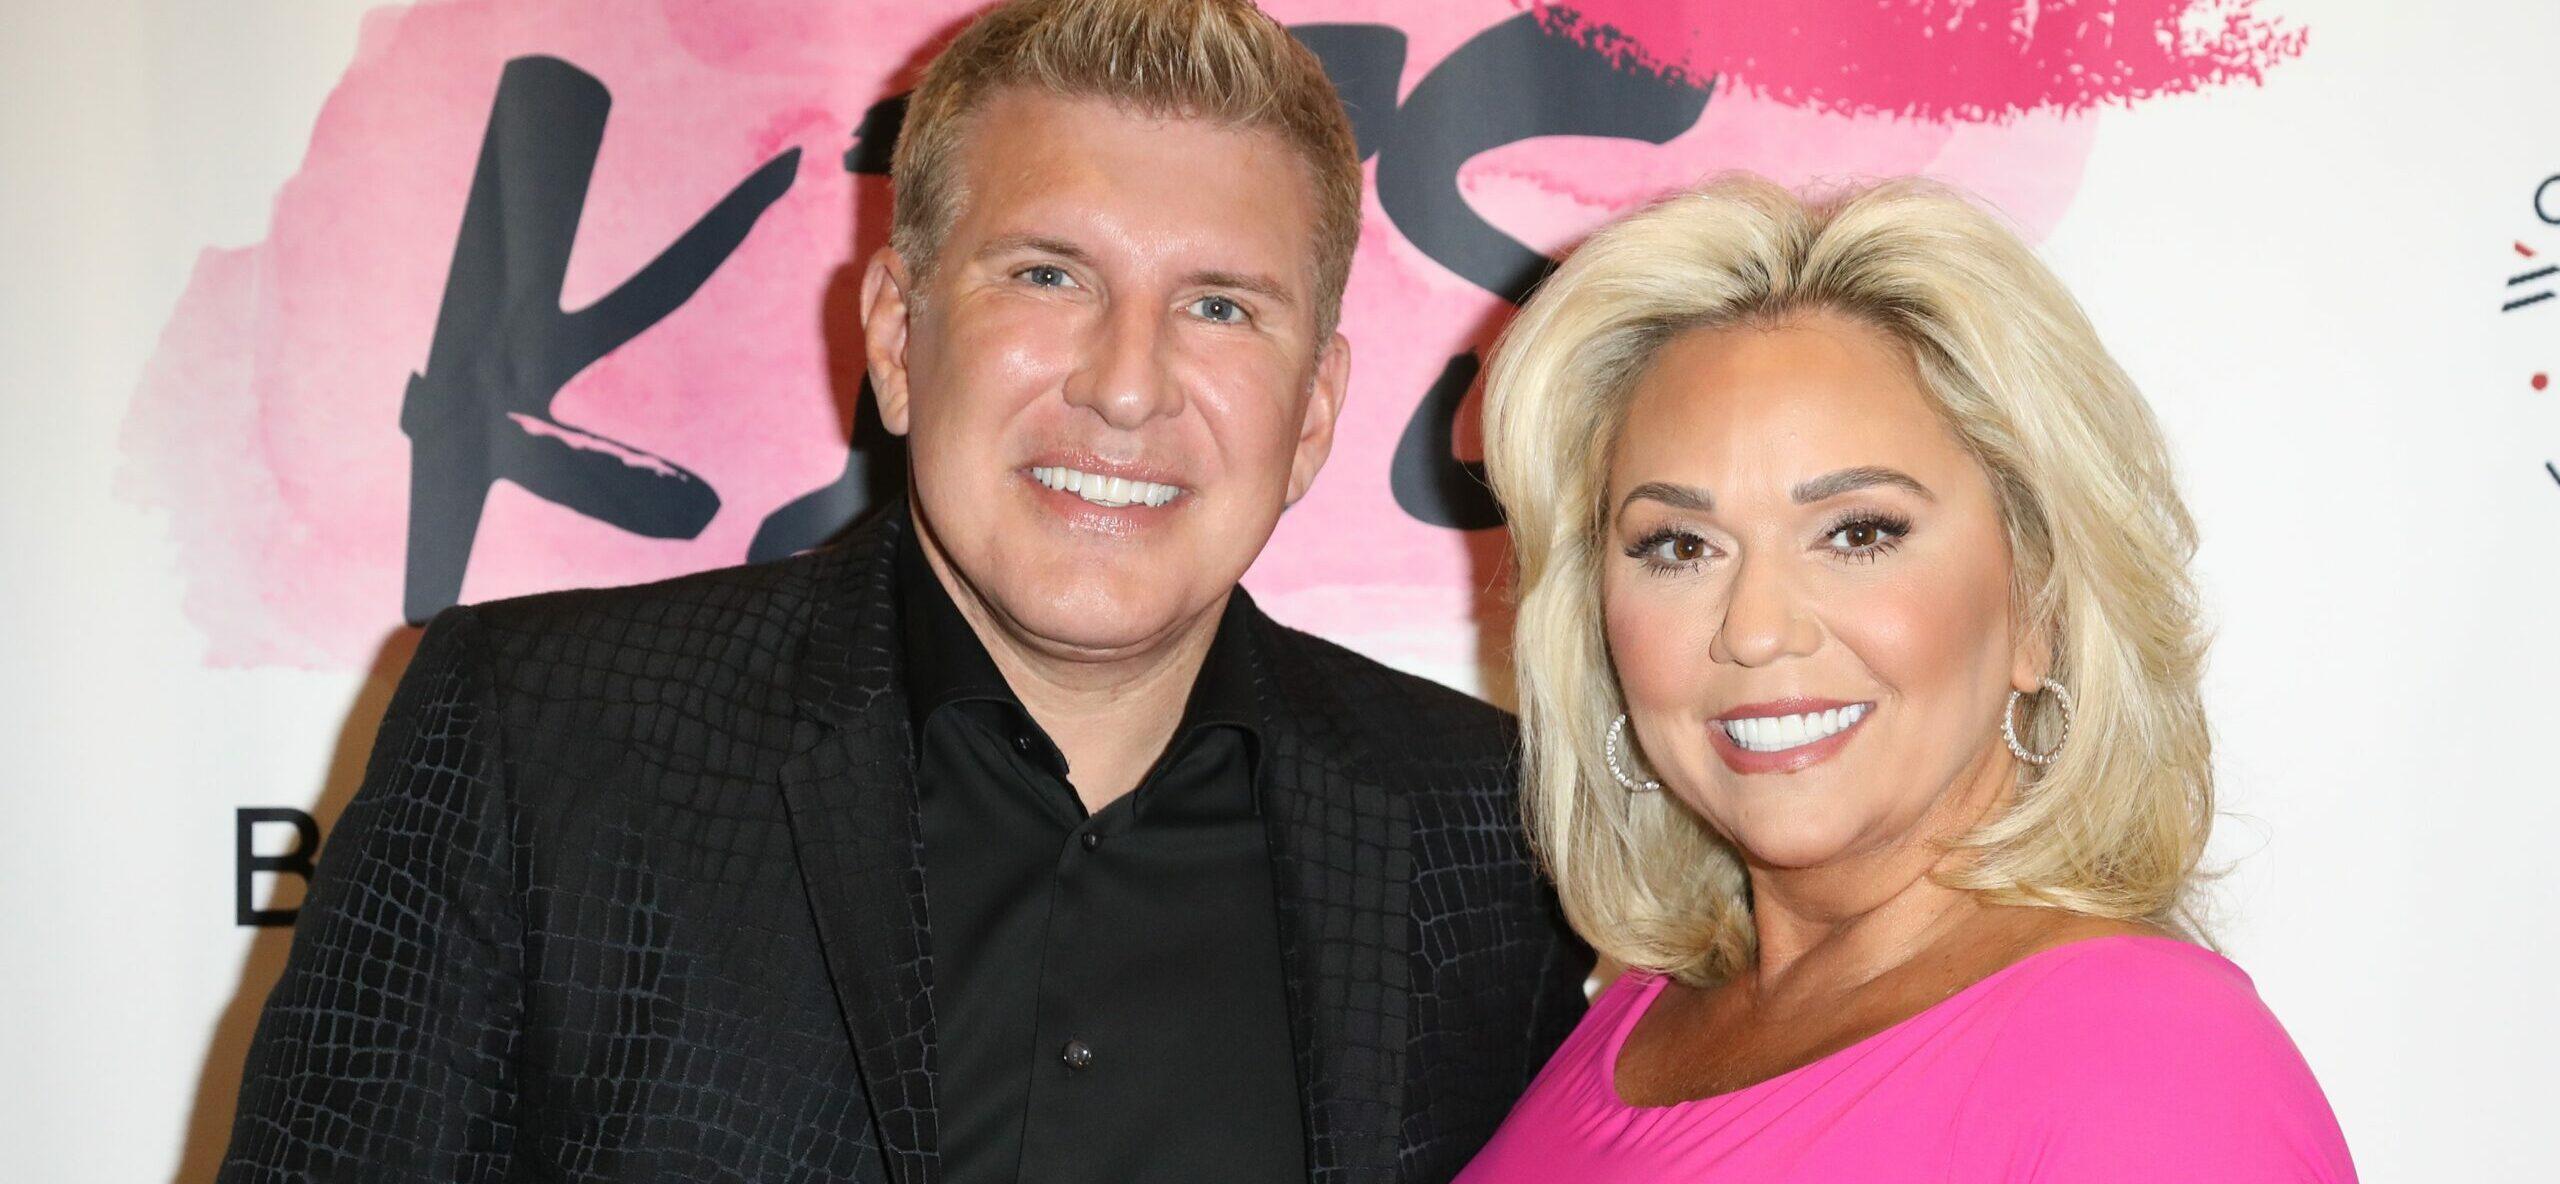 Lindsie Chrisley Vows To NEVER Reconcile With Todd Or Her Family